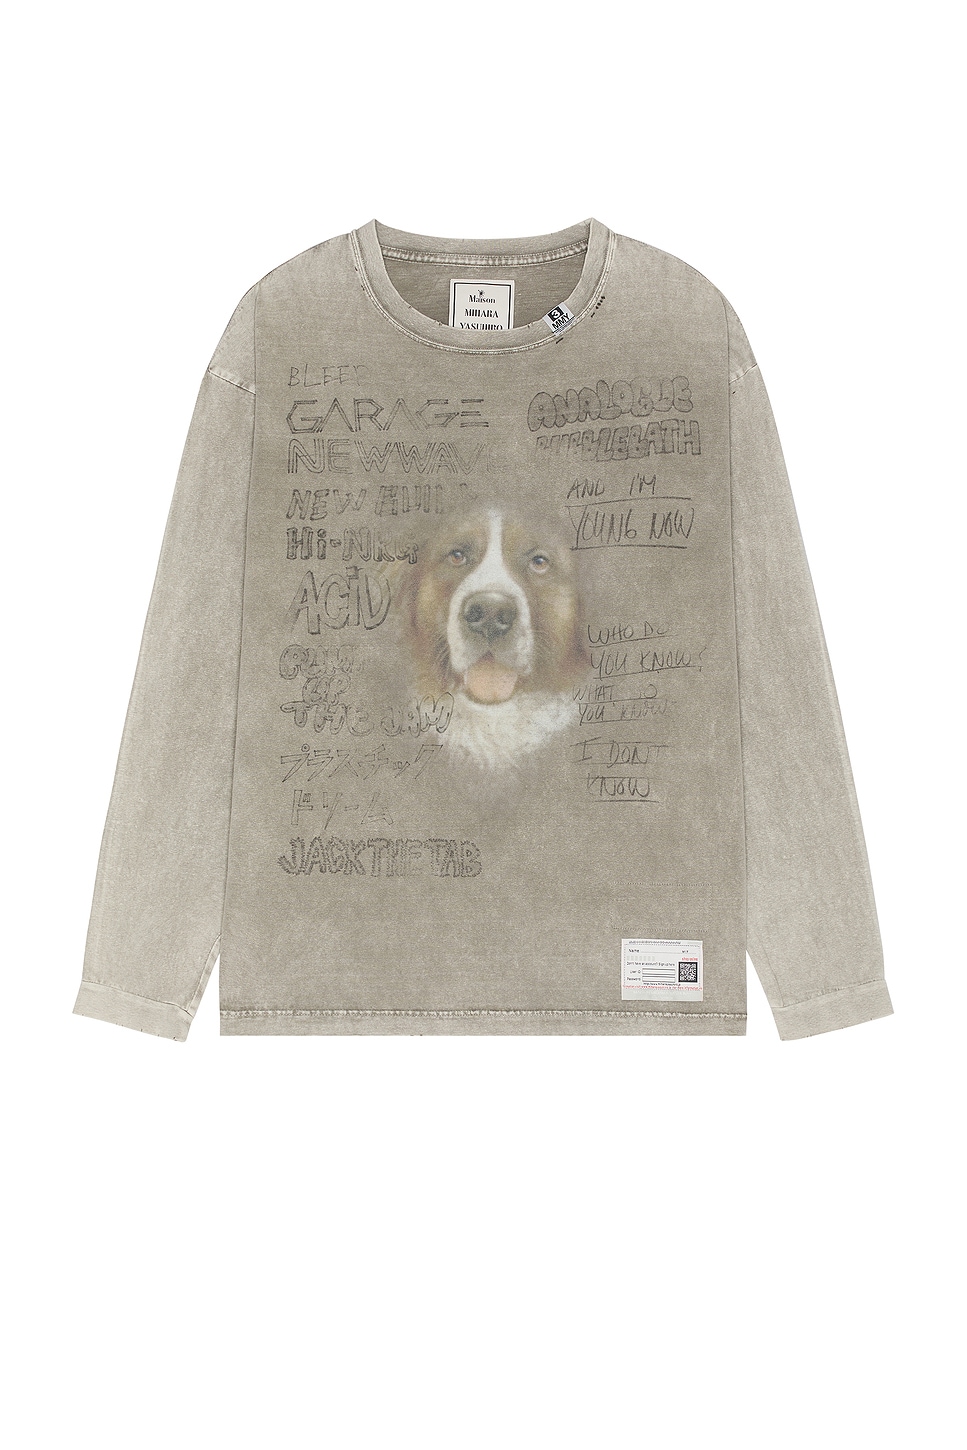 Bleached Long Sleeves Tee in Taupe